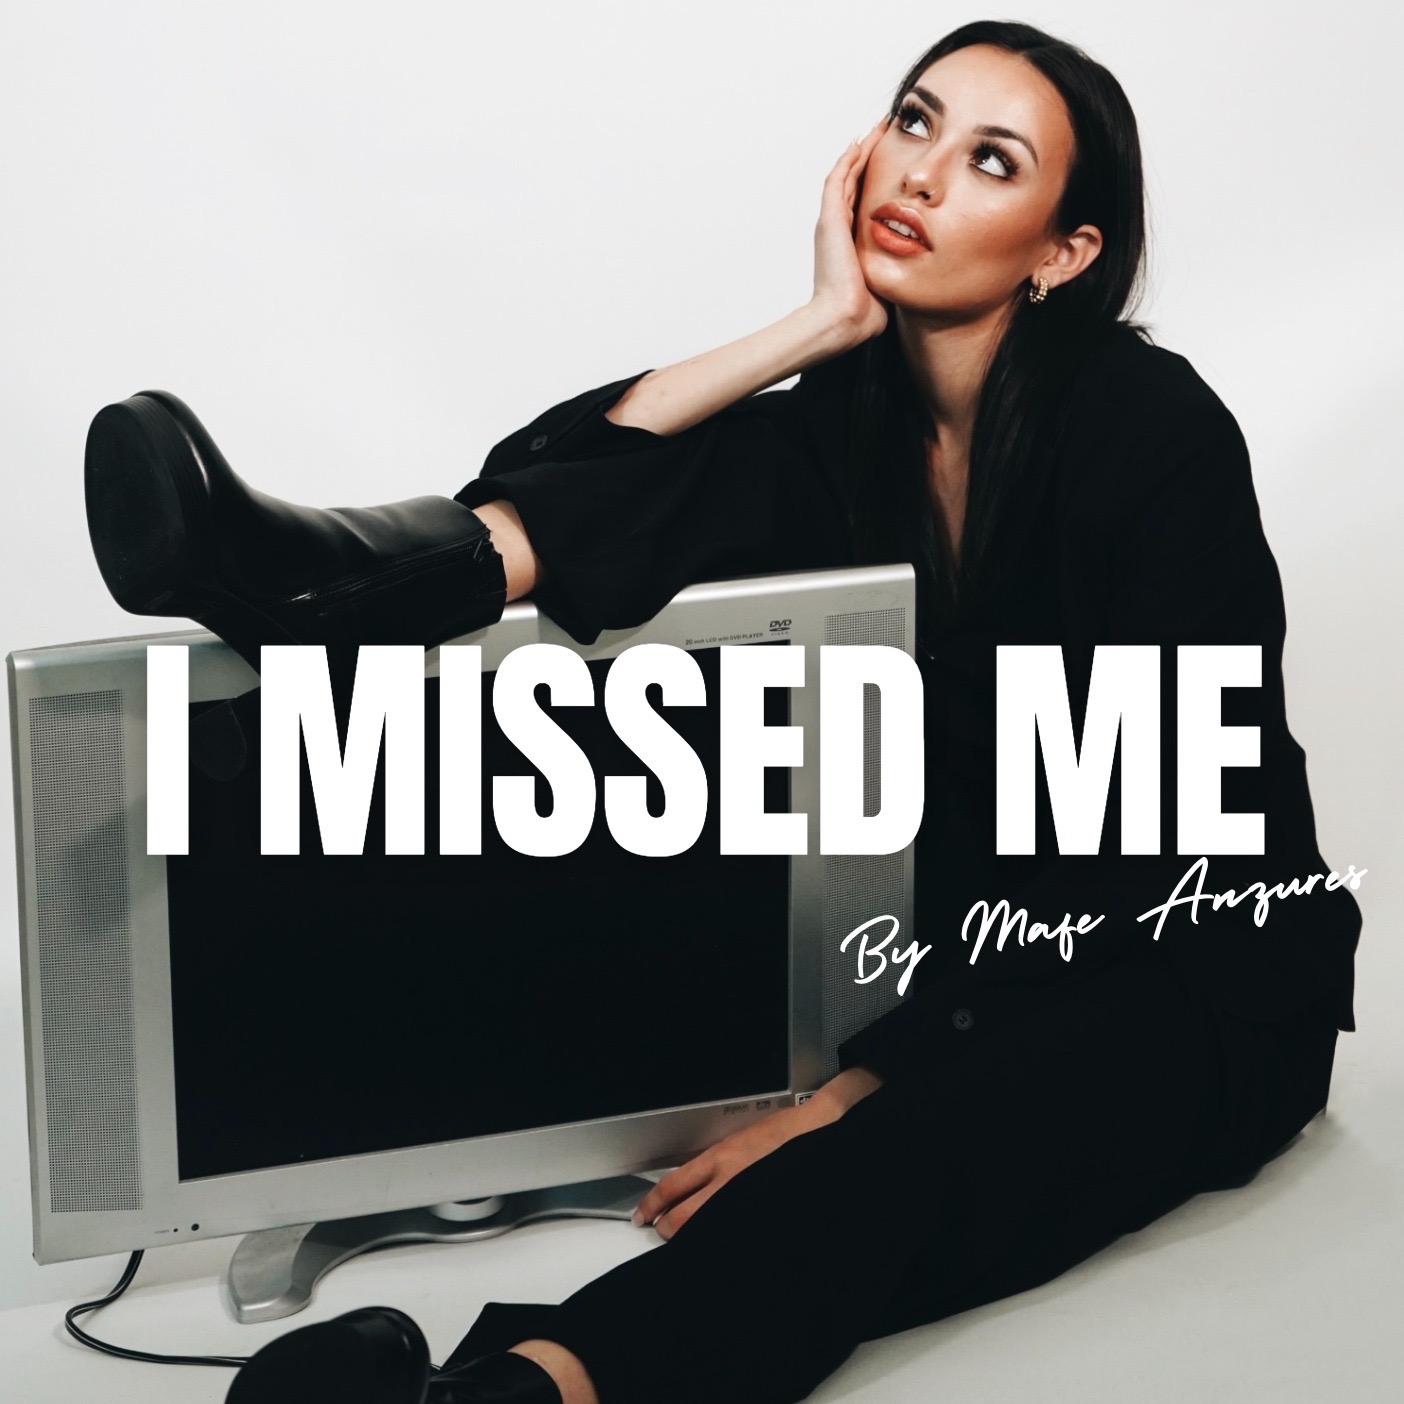 Helping friends through toxic relationships, avoiding codependency & maintaining a quality friendship with Mariana Jimenez | I MISSED YOU EP. #1